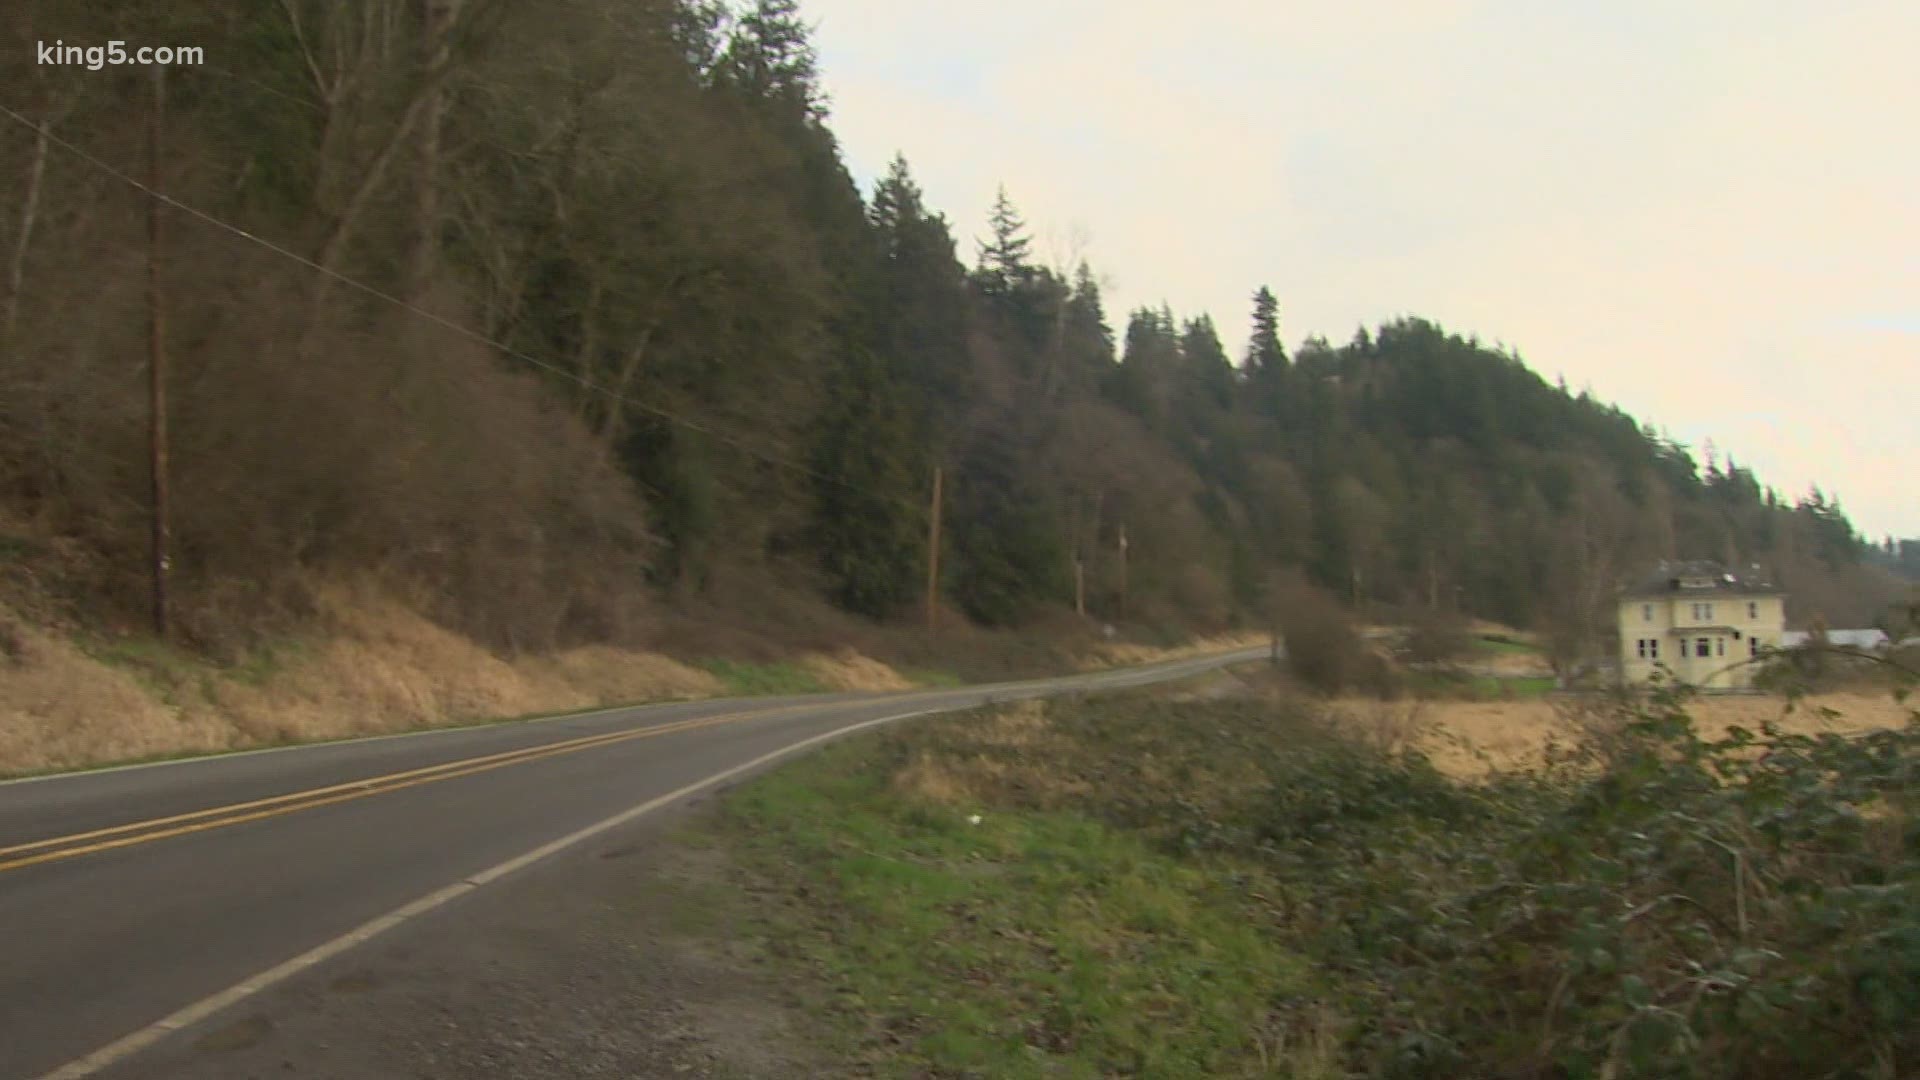 A Stanwood homeowner fears a repeat of the landslide in Oso that killed 43 people.